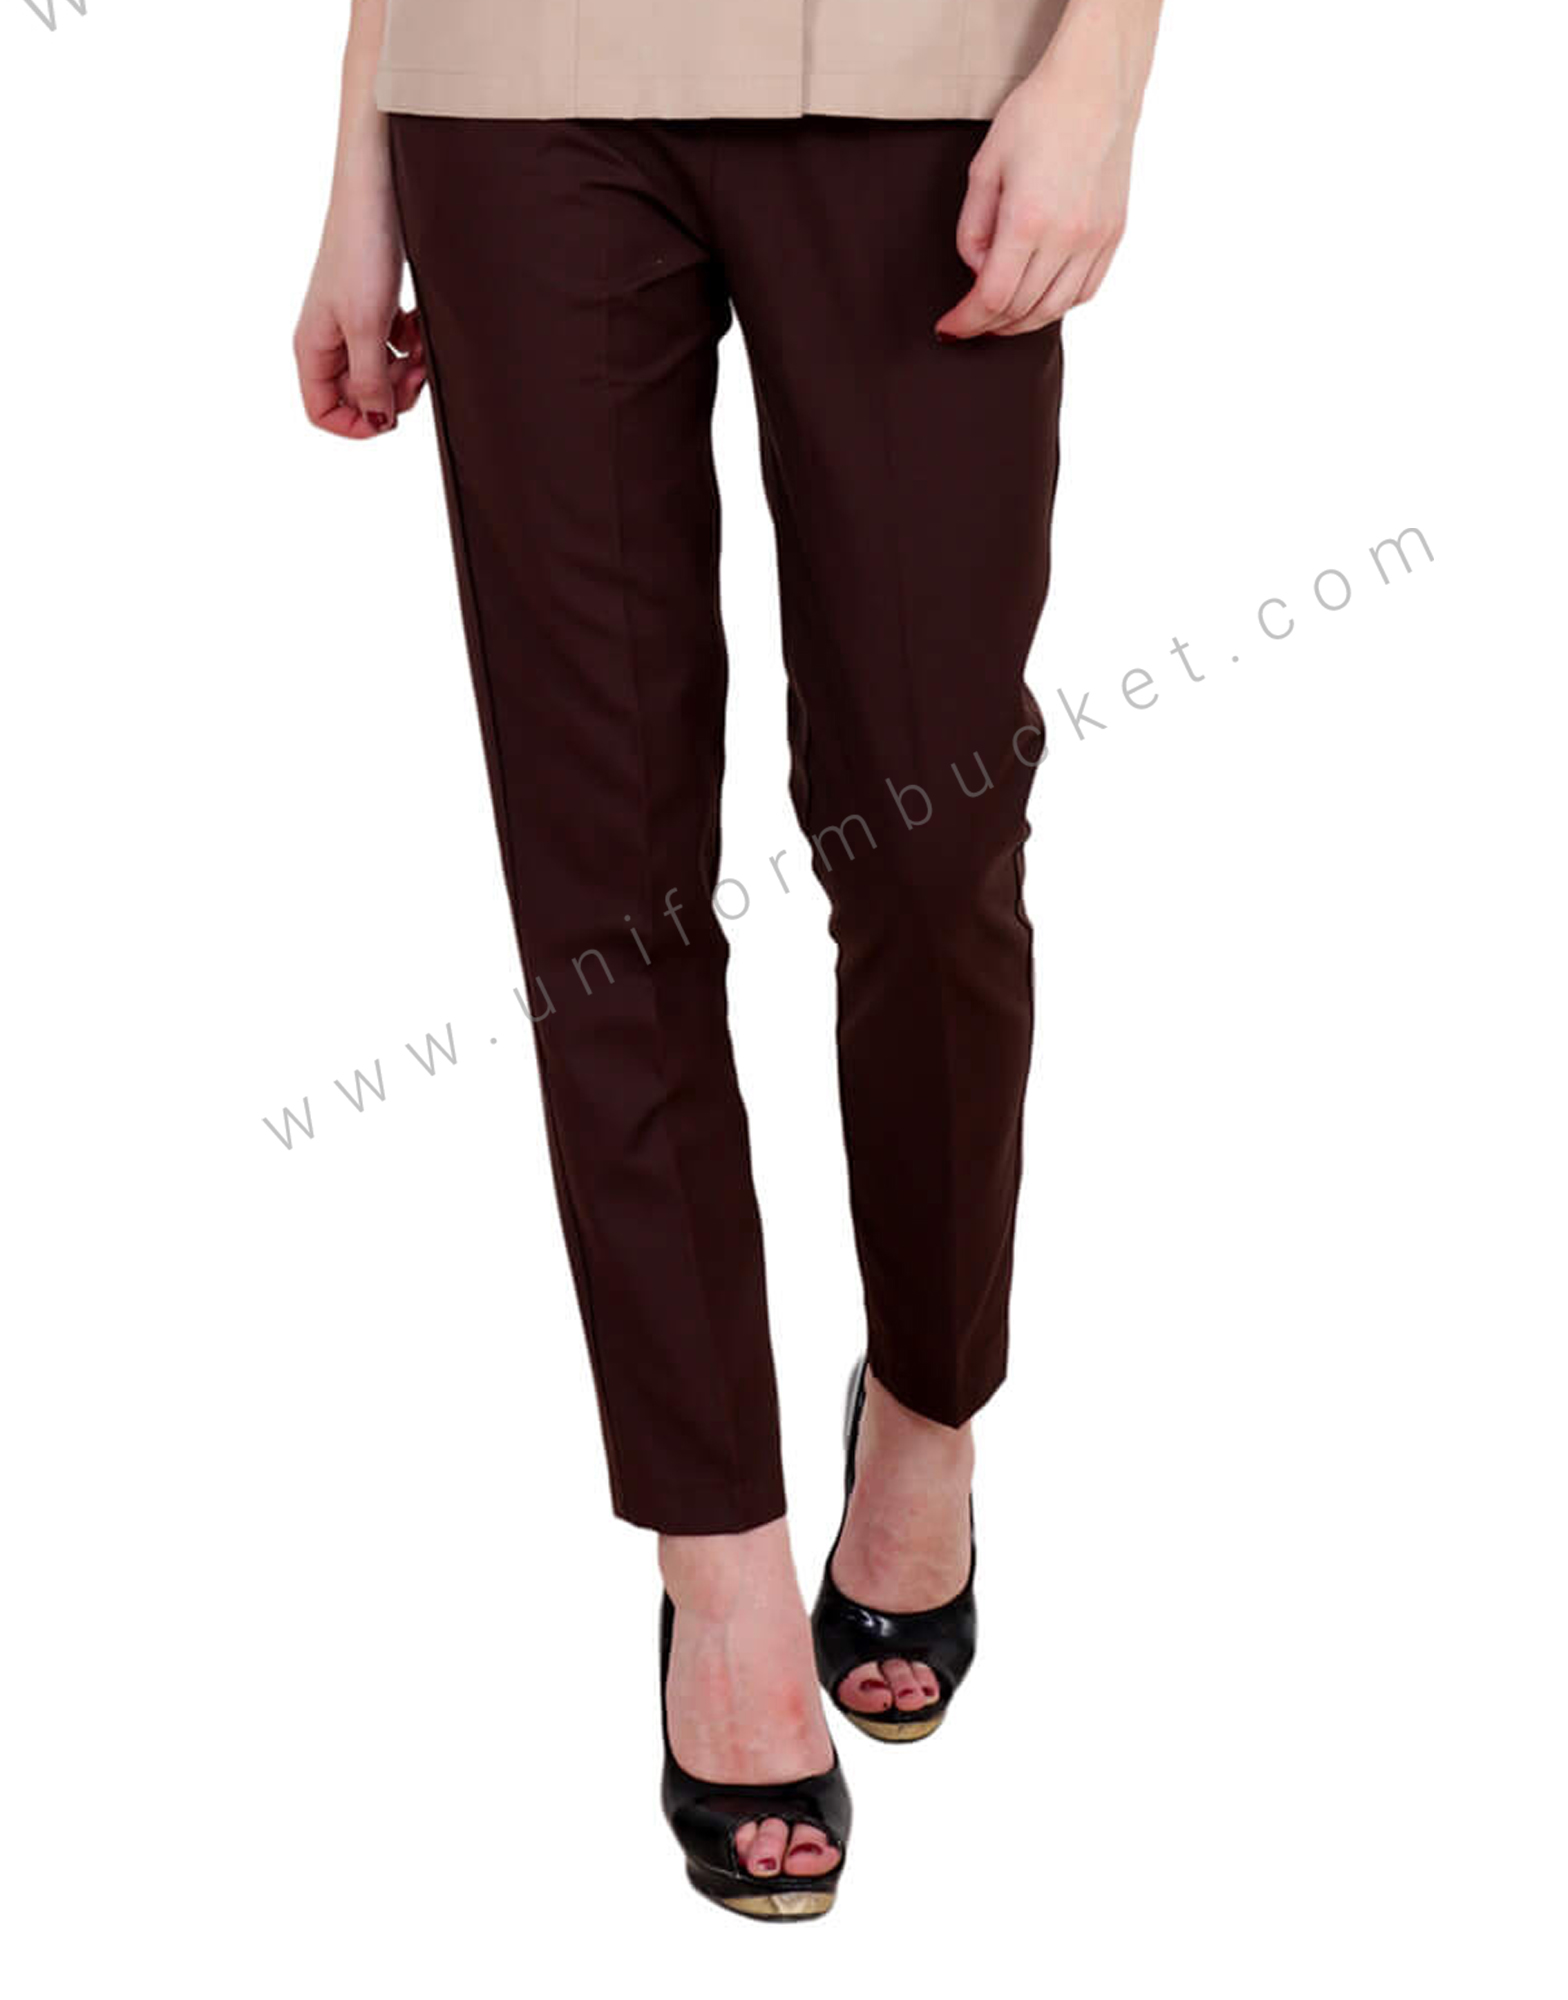 Buy Navy Blue Bell Bottom Pants for Women – Formal Pants – Office Pants  Girls Pants at Amazon.in